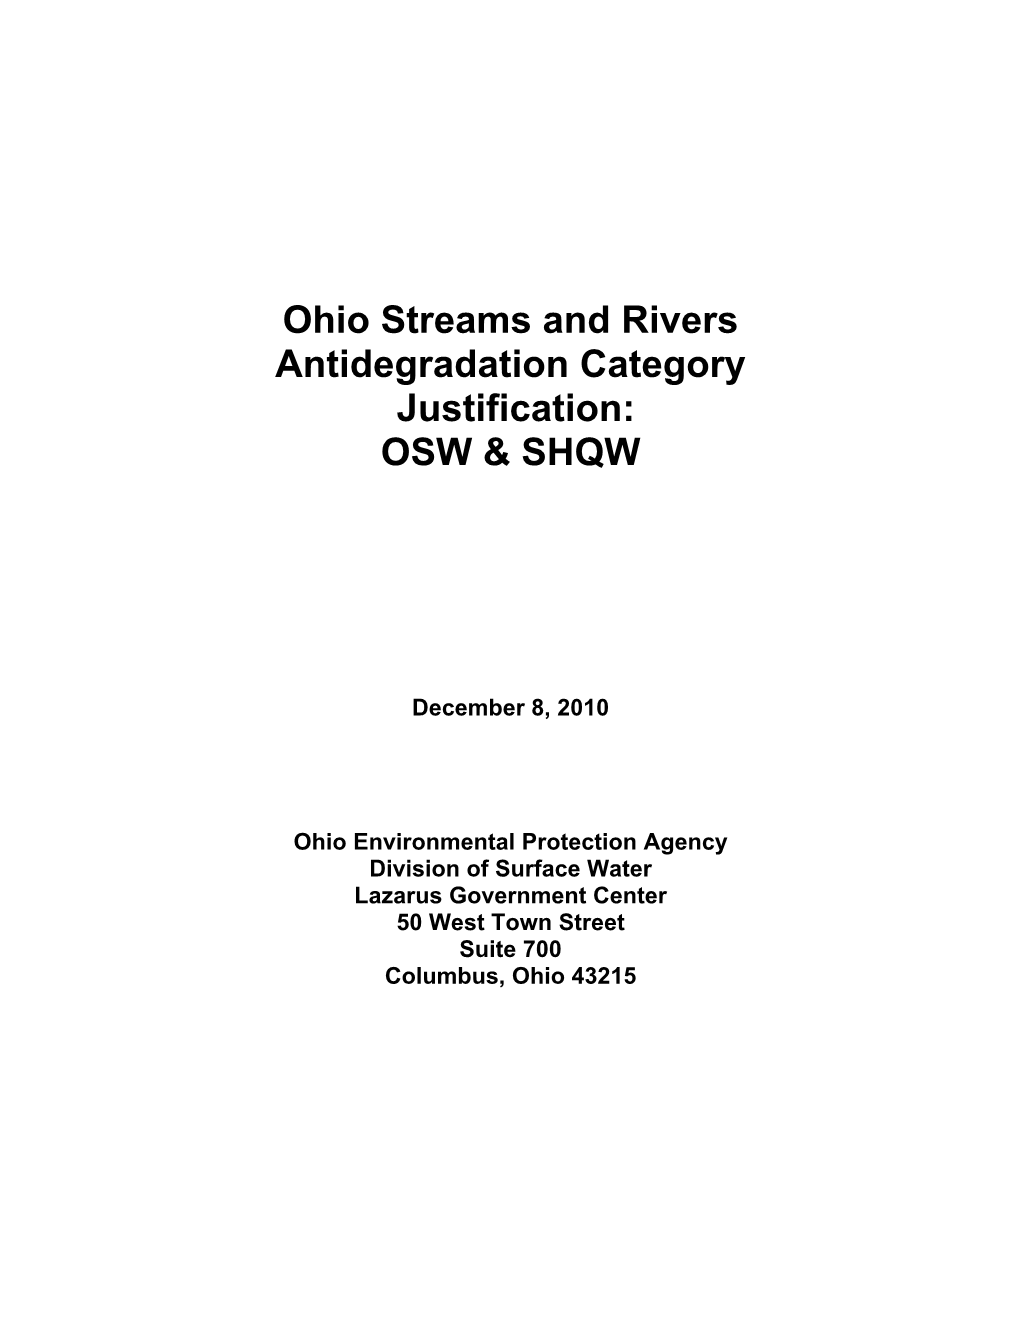 Ohio Streams and Rivers Antidegradation Category Justification: OSW & SHQW